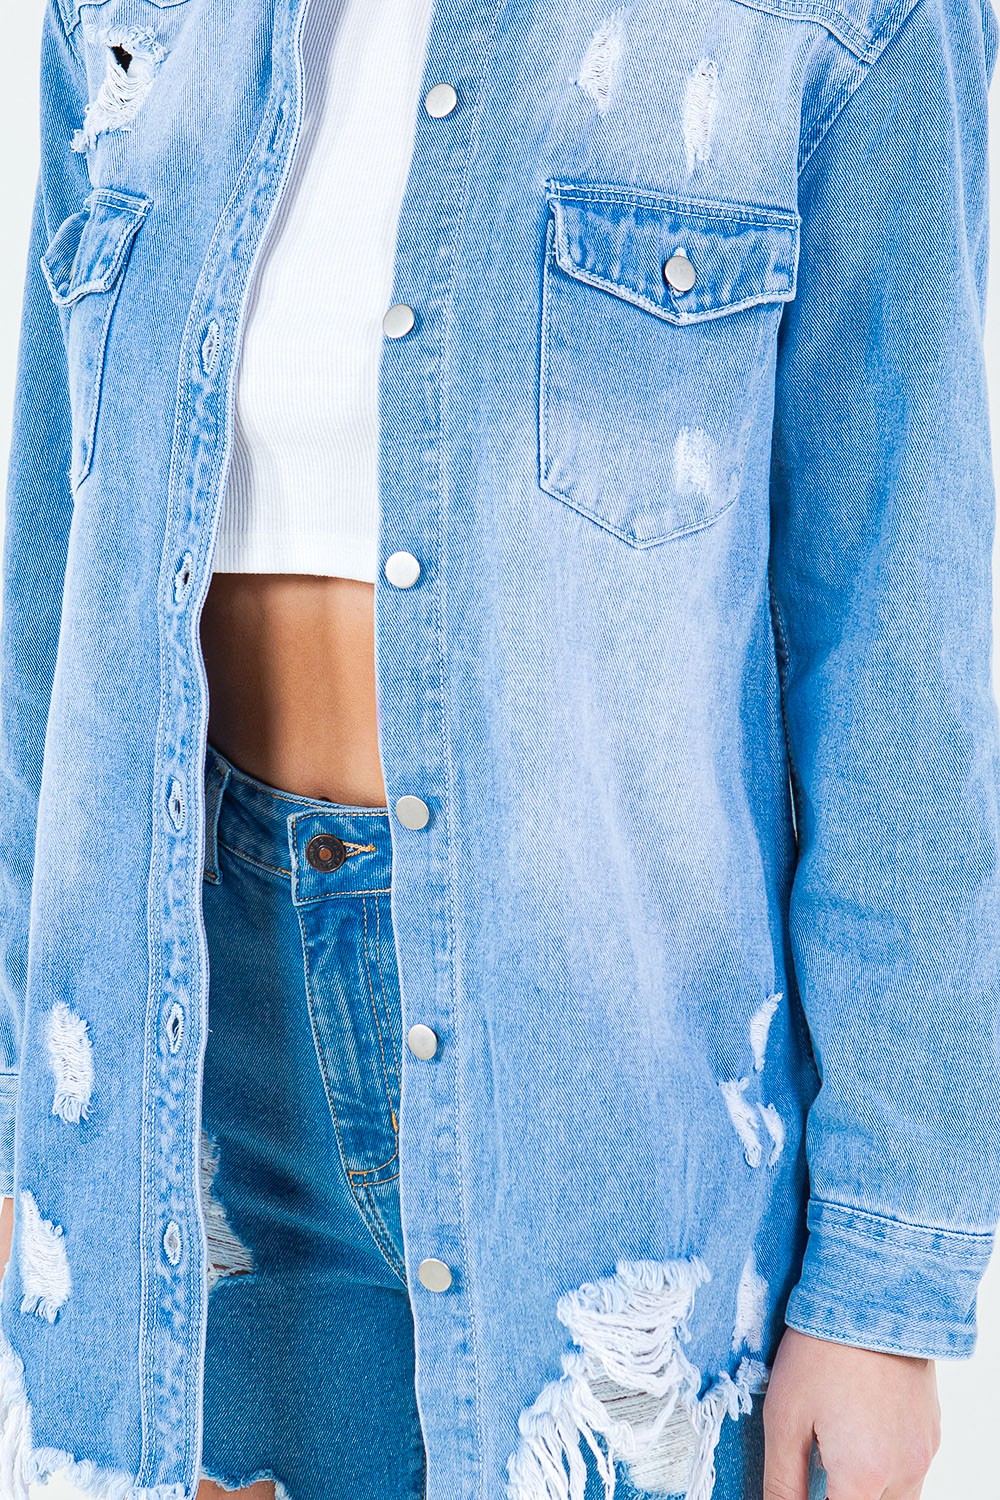 Introducing the Frayed Hem Distressed Denim Shirt Jacket. This stylish piece combines the timeless appeal of denim with a contemporary twist. The frayed hem adds a touch of edginess, while the distressed details create a worn-in look.  S - 3X